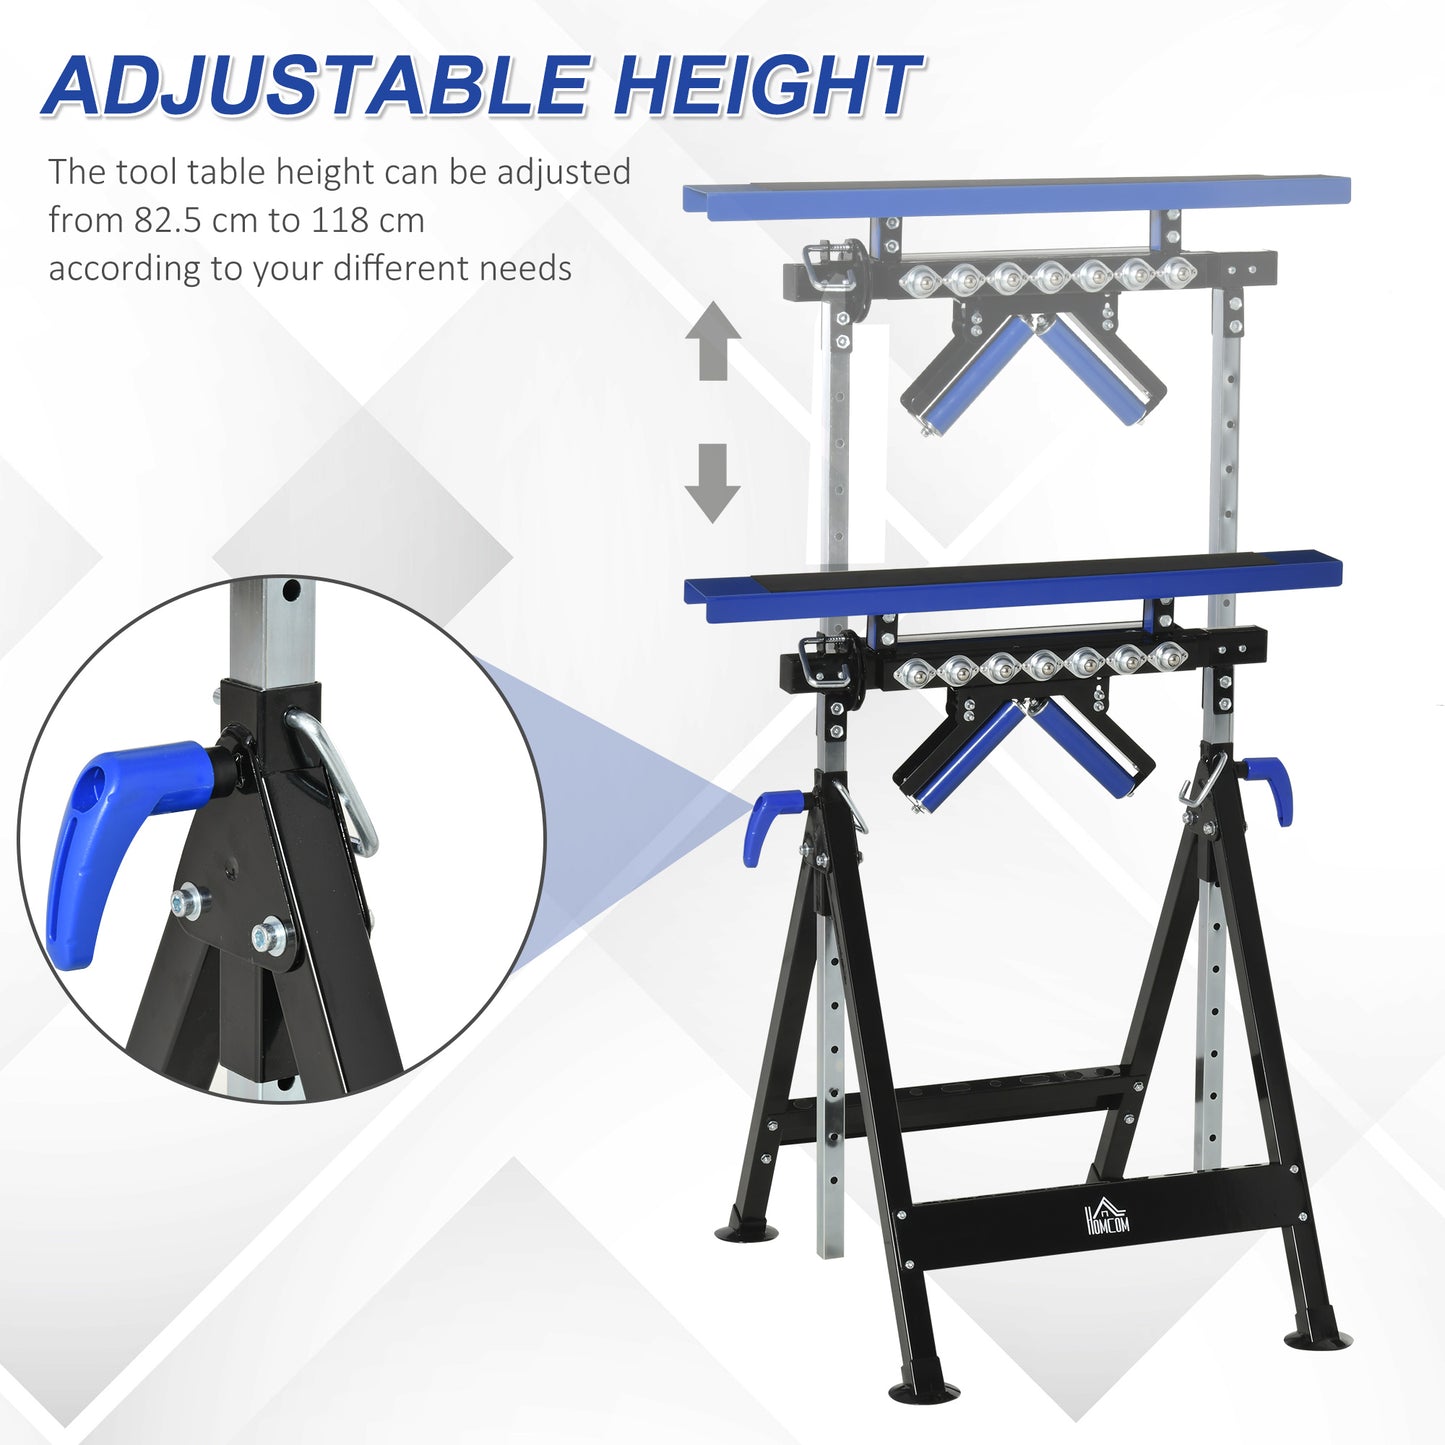 HOMCOM Multi-Function Workbench Ball Support Stand Roller Trestle, Height Adjustable